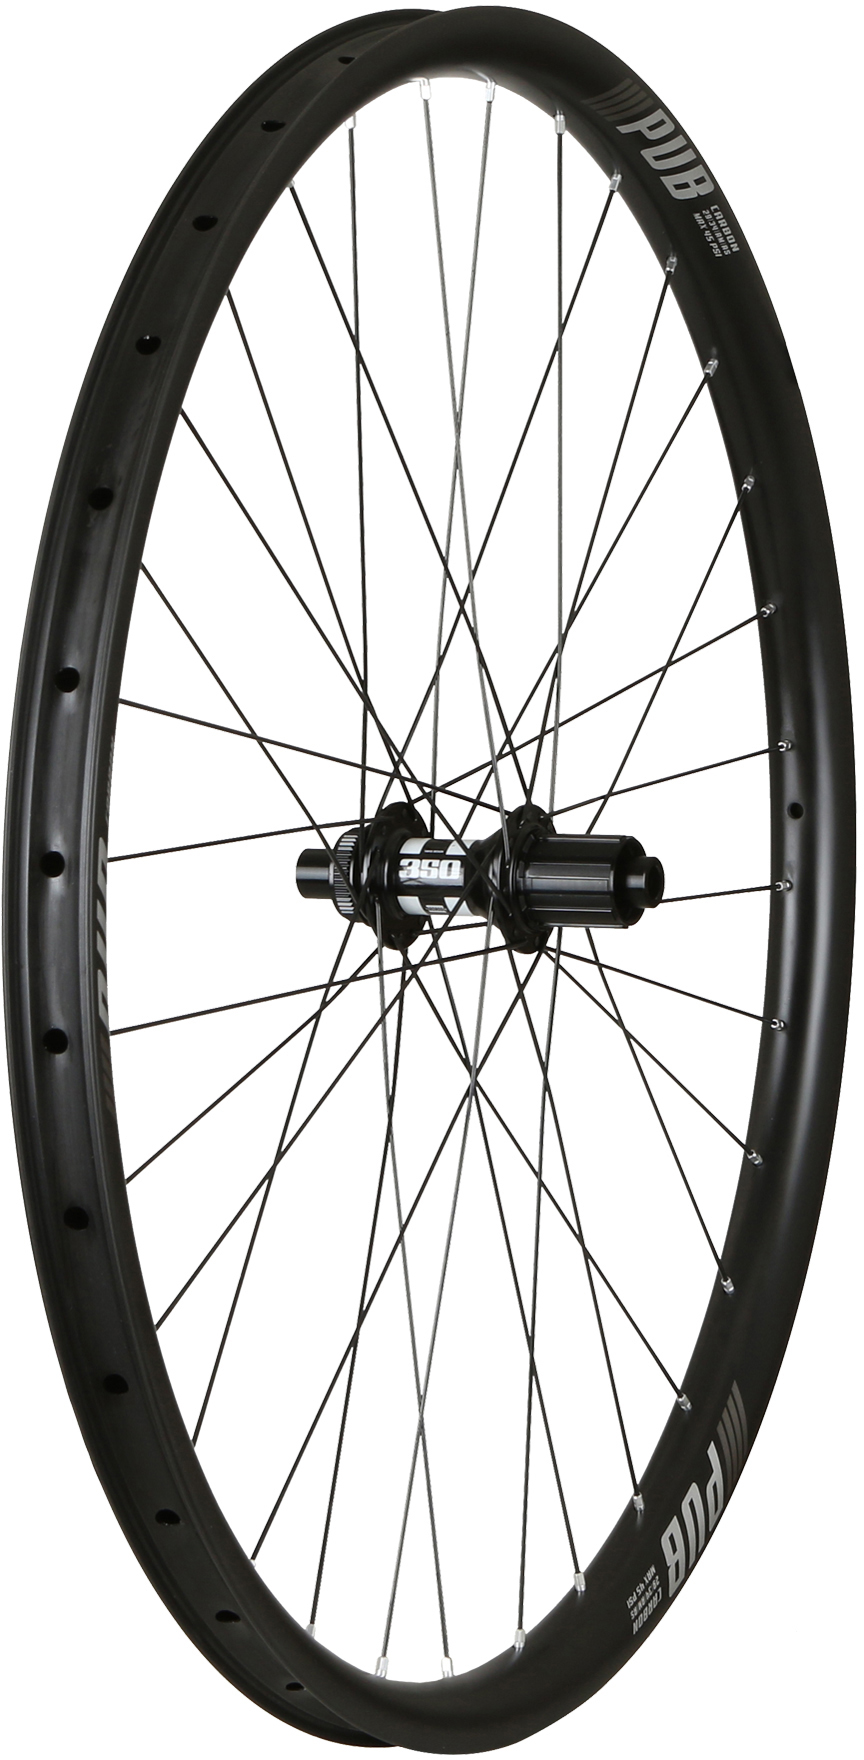 Win a PUB Wheels Carbon Wheelset of your choice